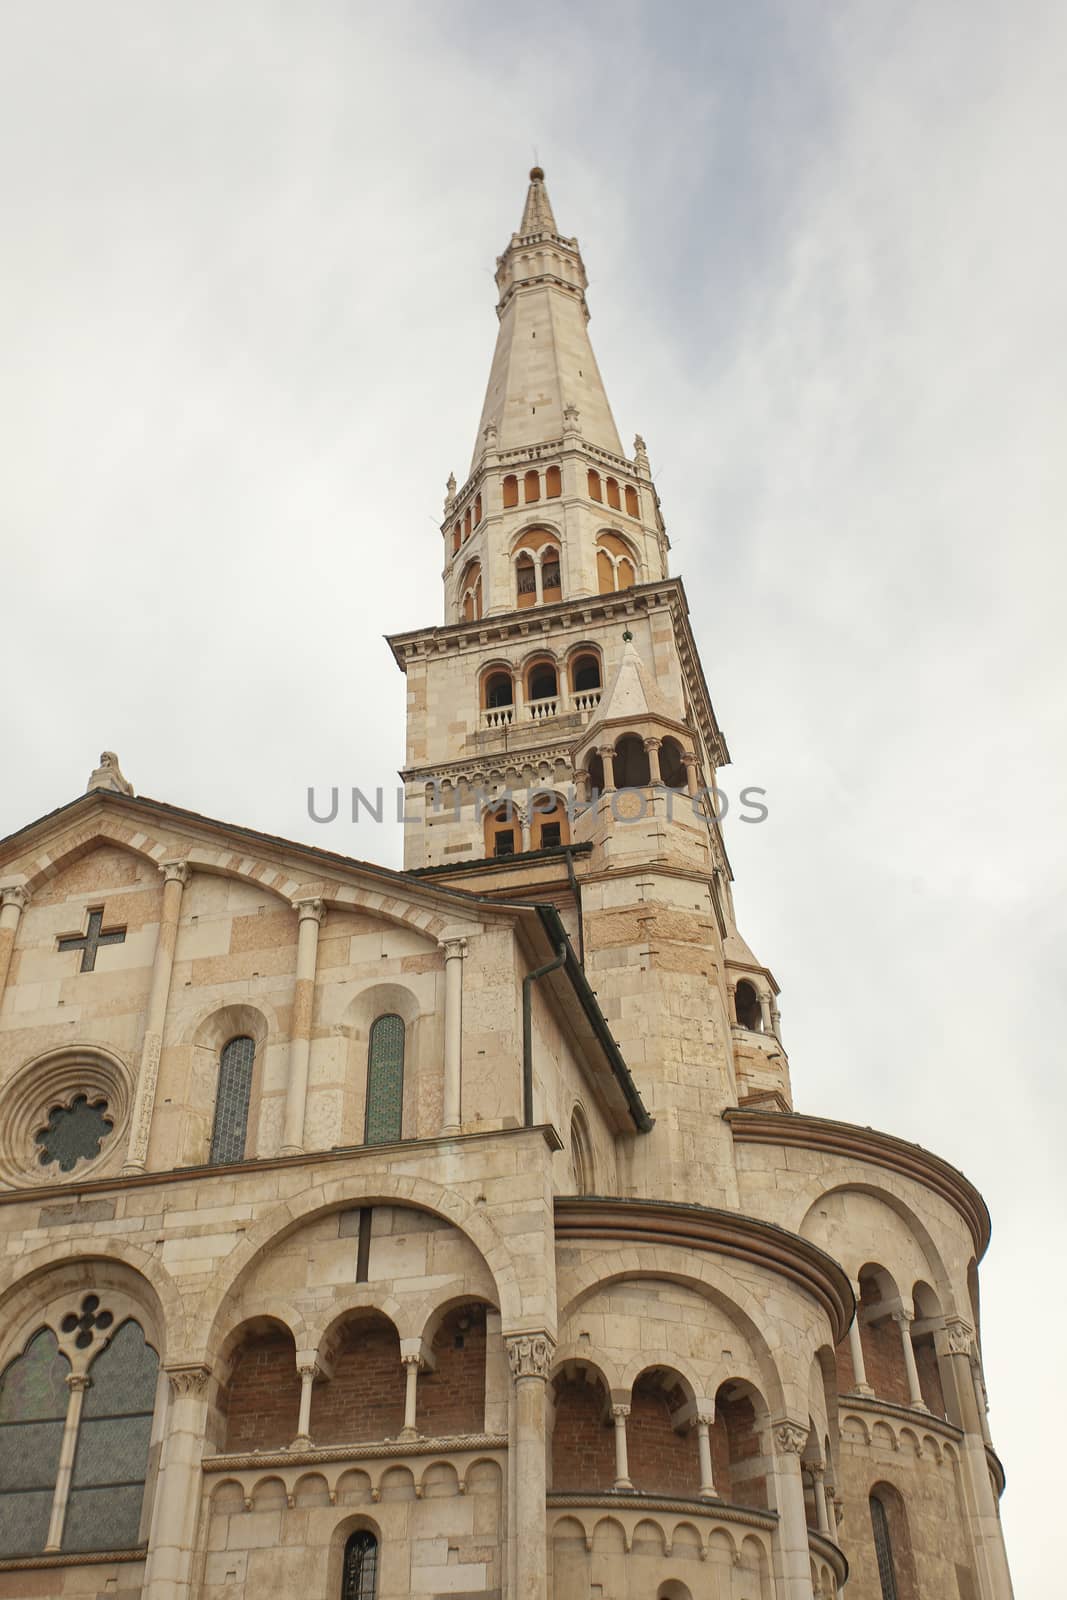 Ghirlandina ancient tower and duomo from below in Modena city, Italy